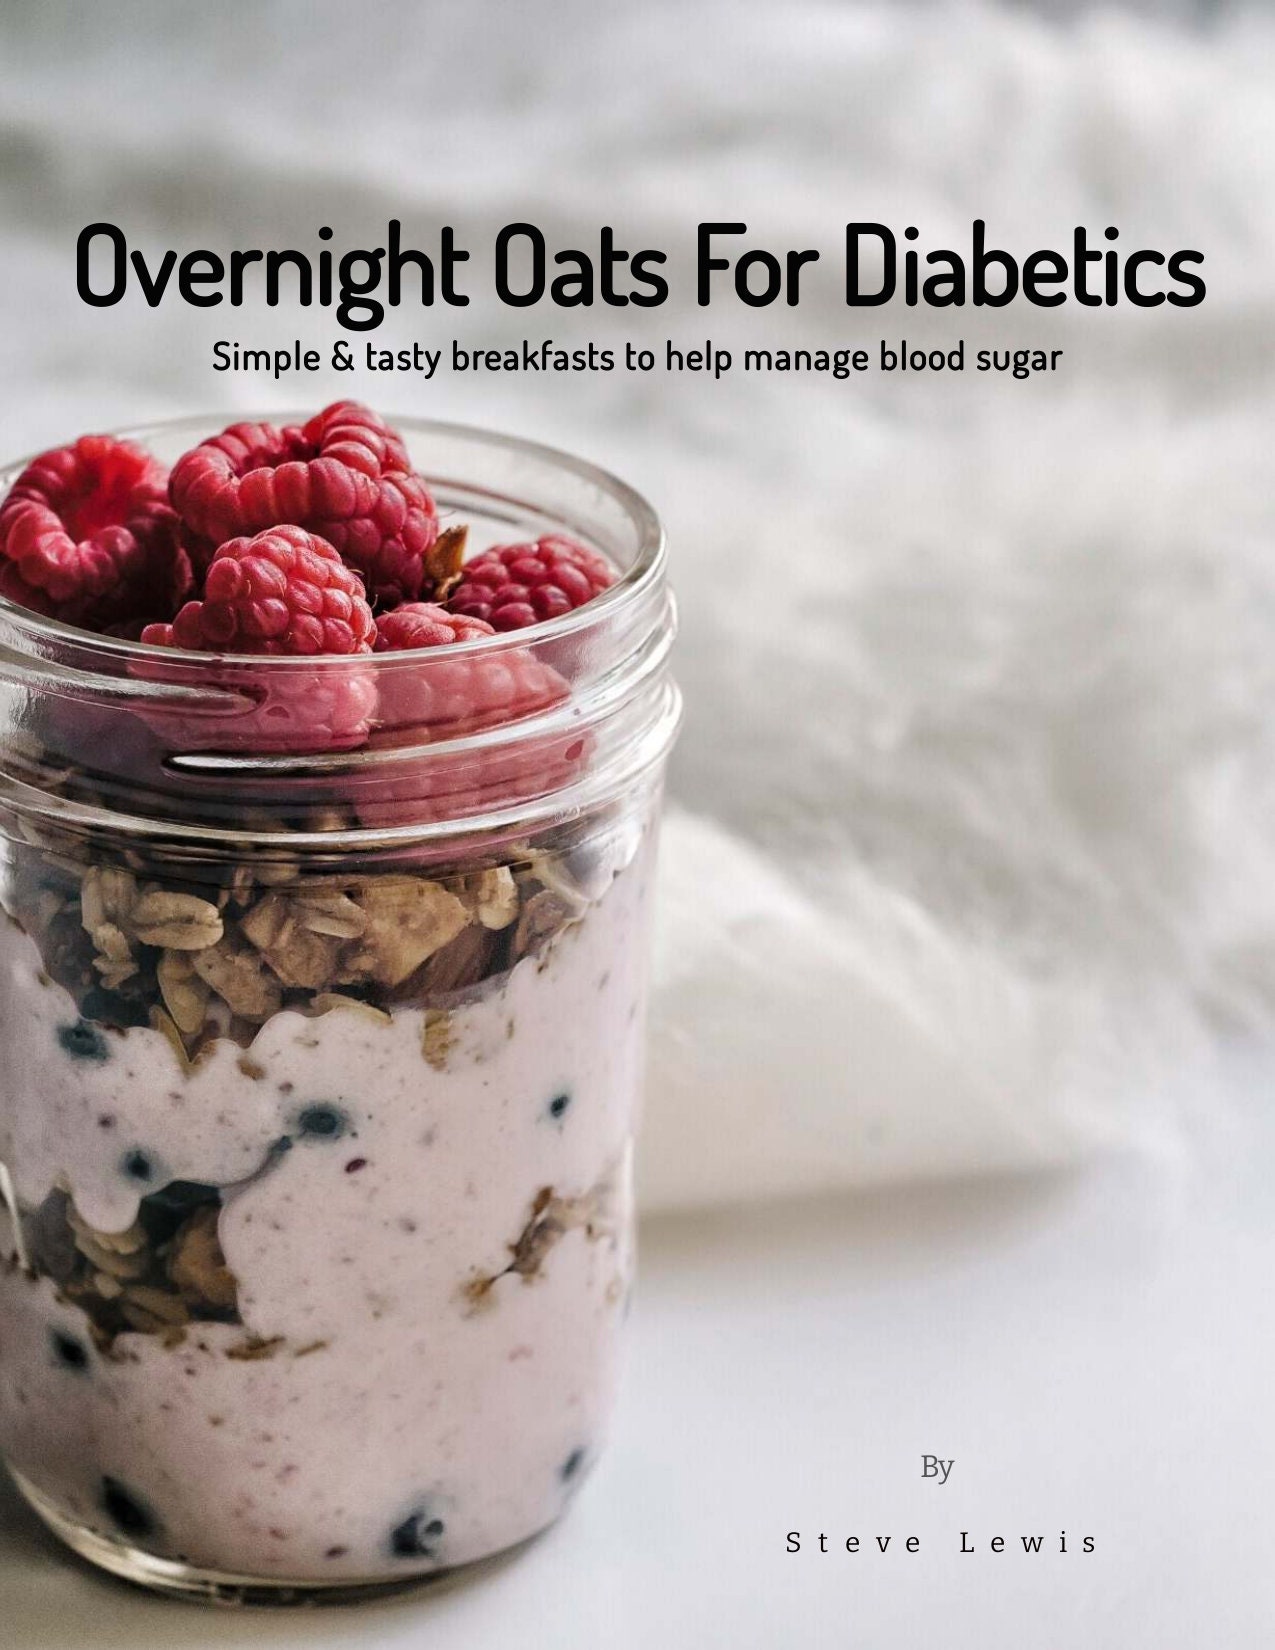 B&B Farmhouse Overnight Oats Containers with Lids Glass - 16 oz Mason Jars  for Overnight Oats - Ideal Chia Seed Pudding Jars - Glass Jars with Lids